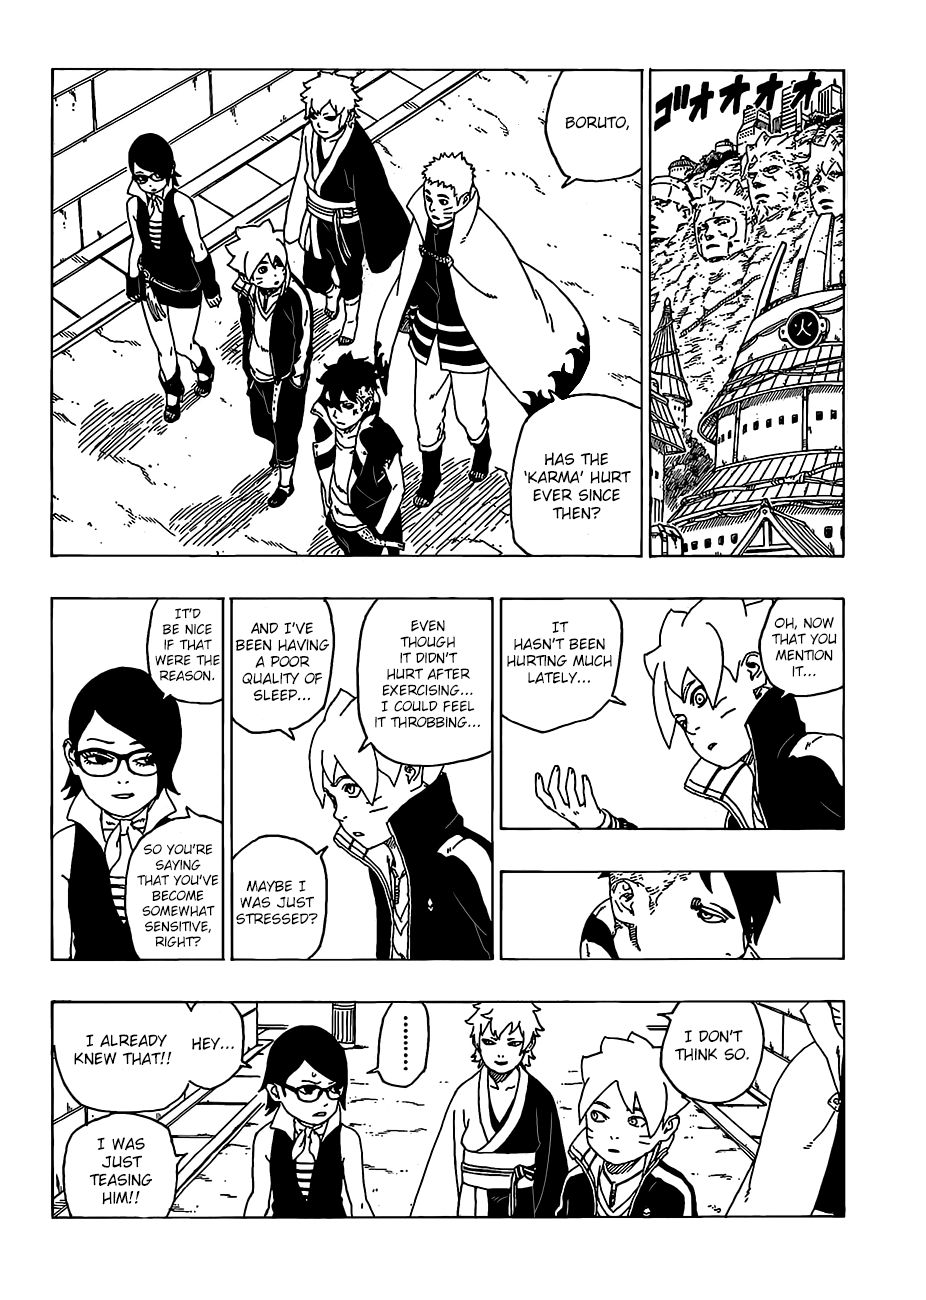 Boruto: Naruto Next Generations Chapter 35 : It's up to You | Page 23